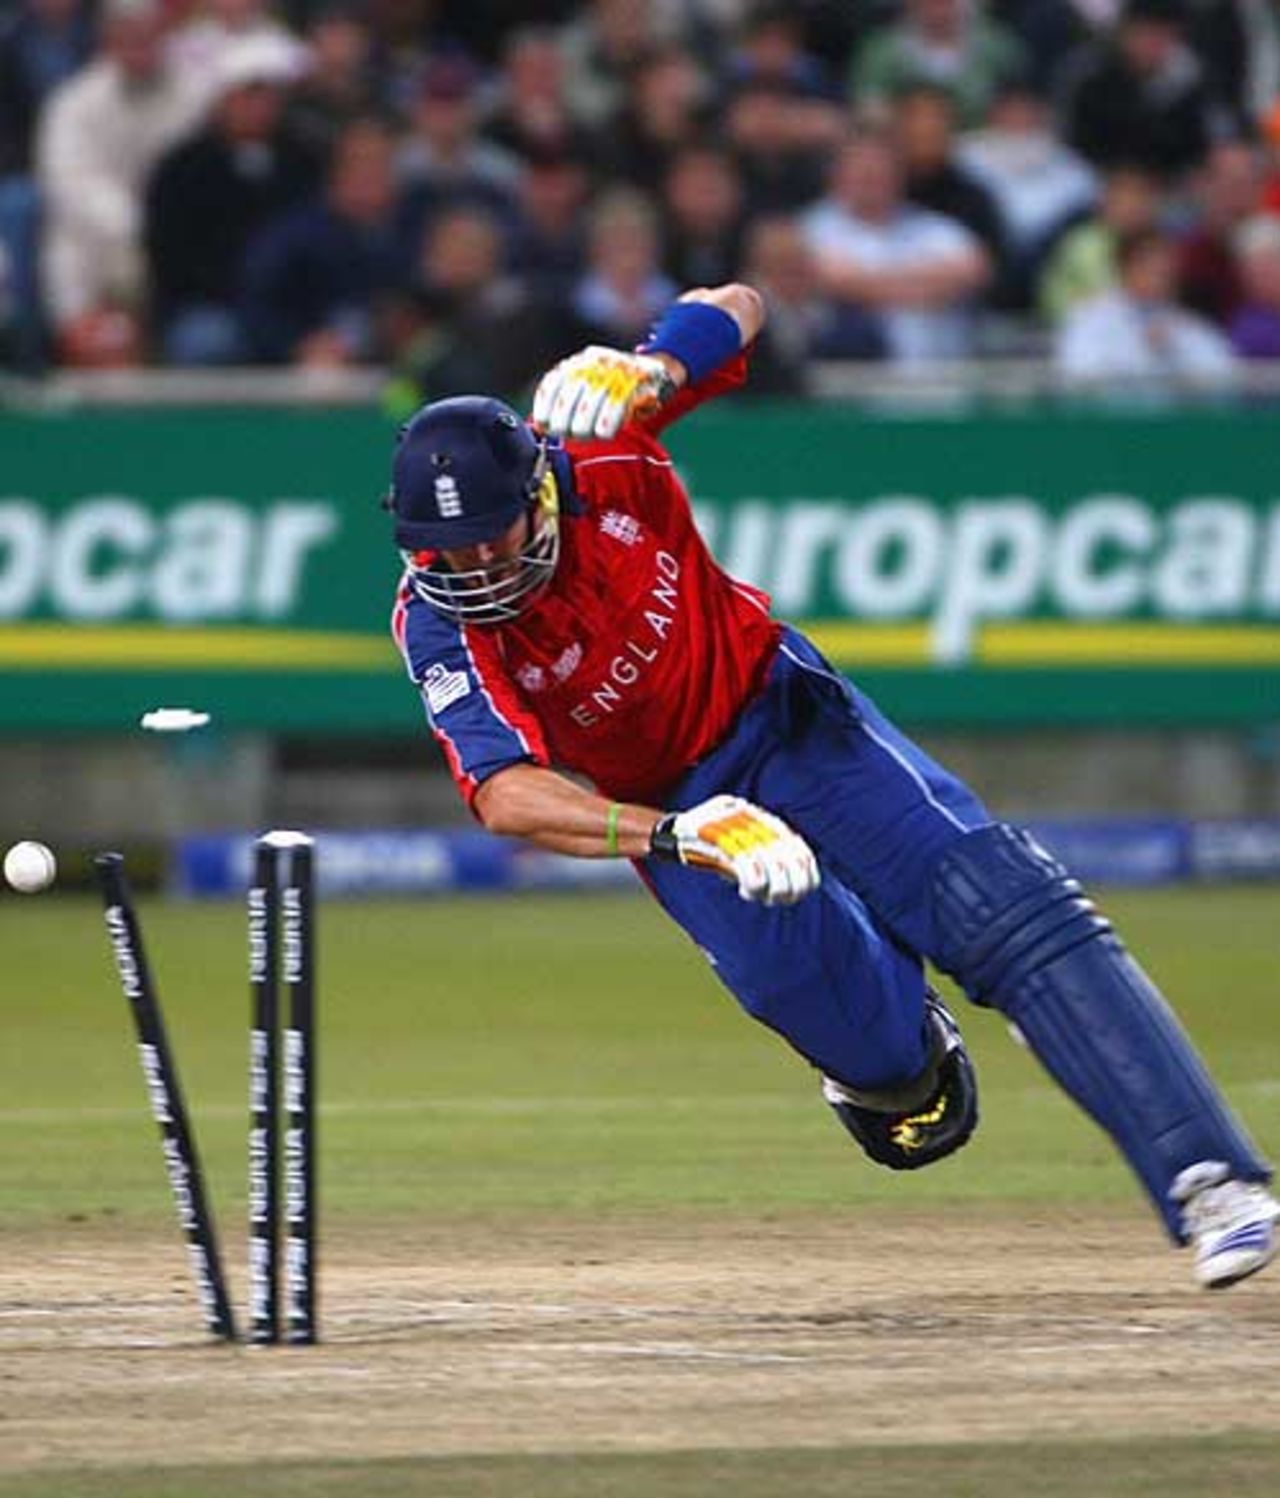 Kevin Pietersen trips over Shaun Pollock and is caught short by a direct hit from Makhaya Ntini, Group E, ICC World Twenty20, Cape Town, September 16, 2007